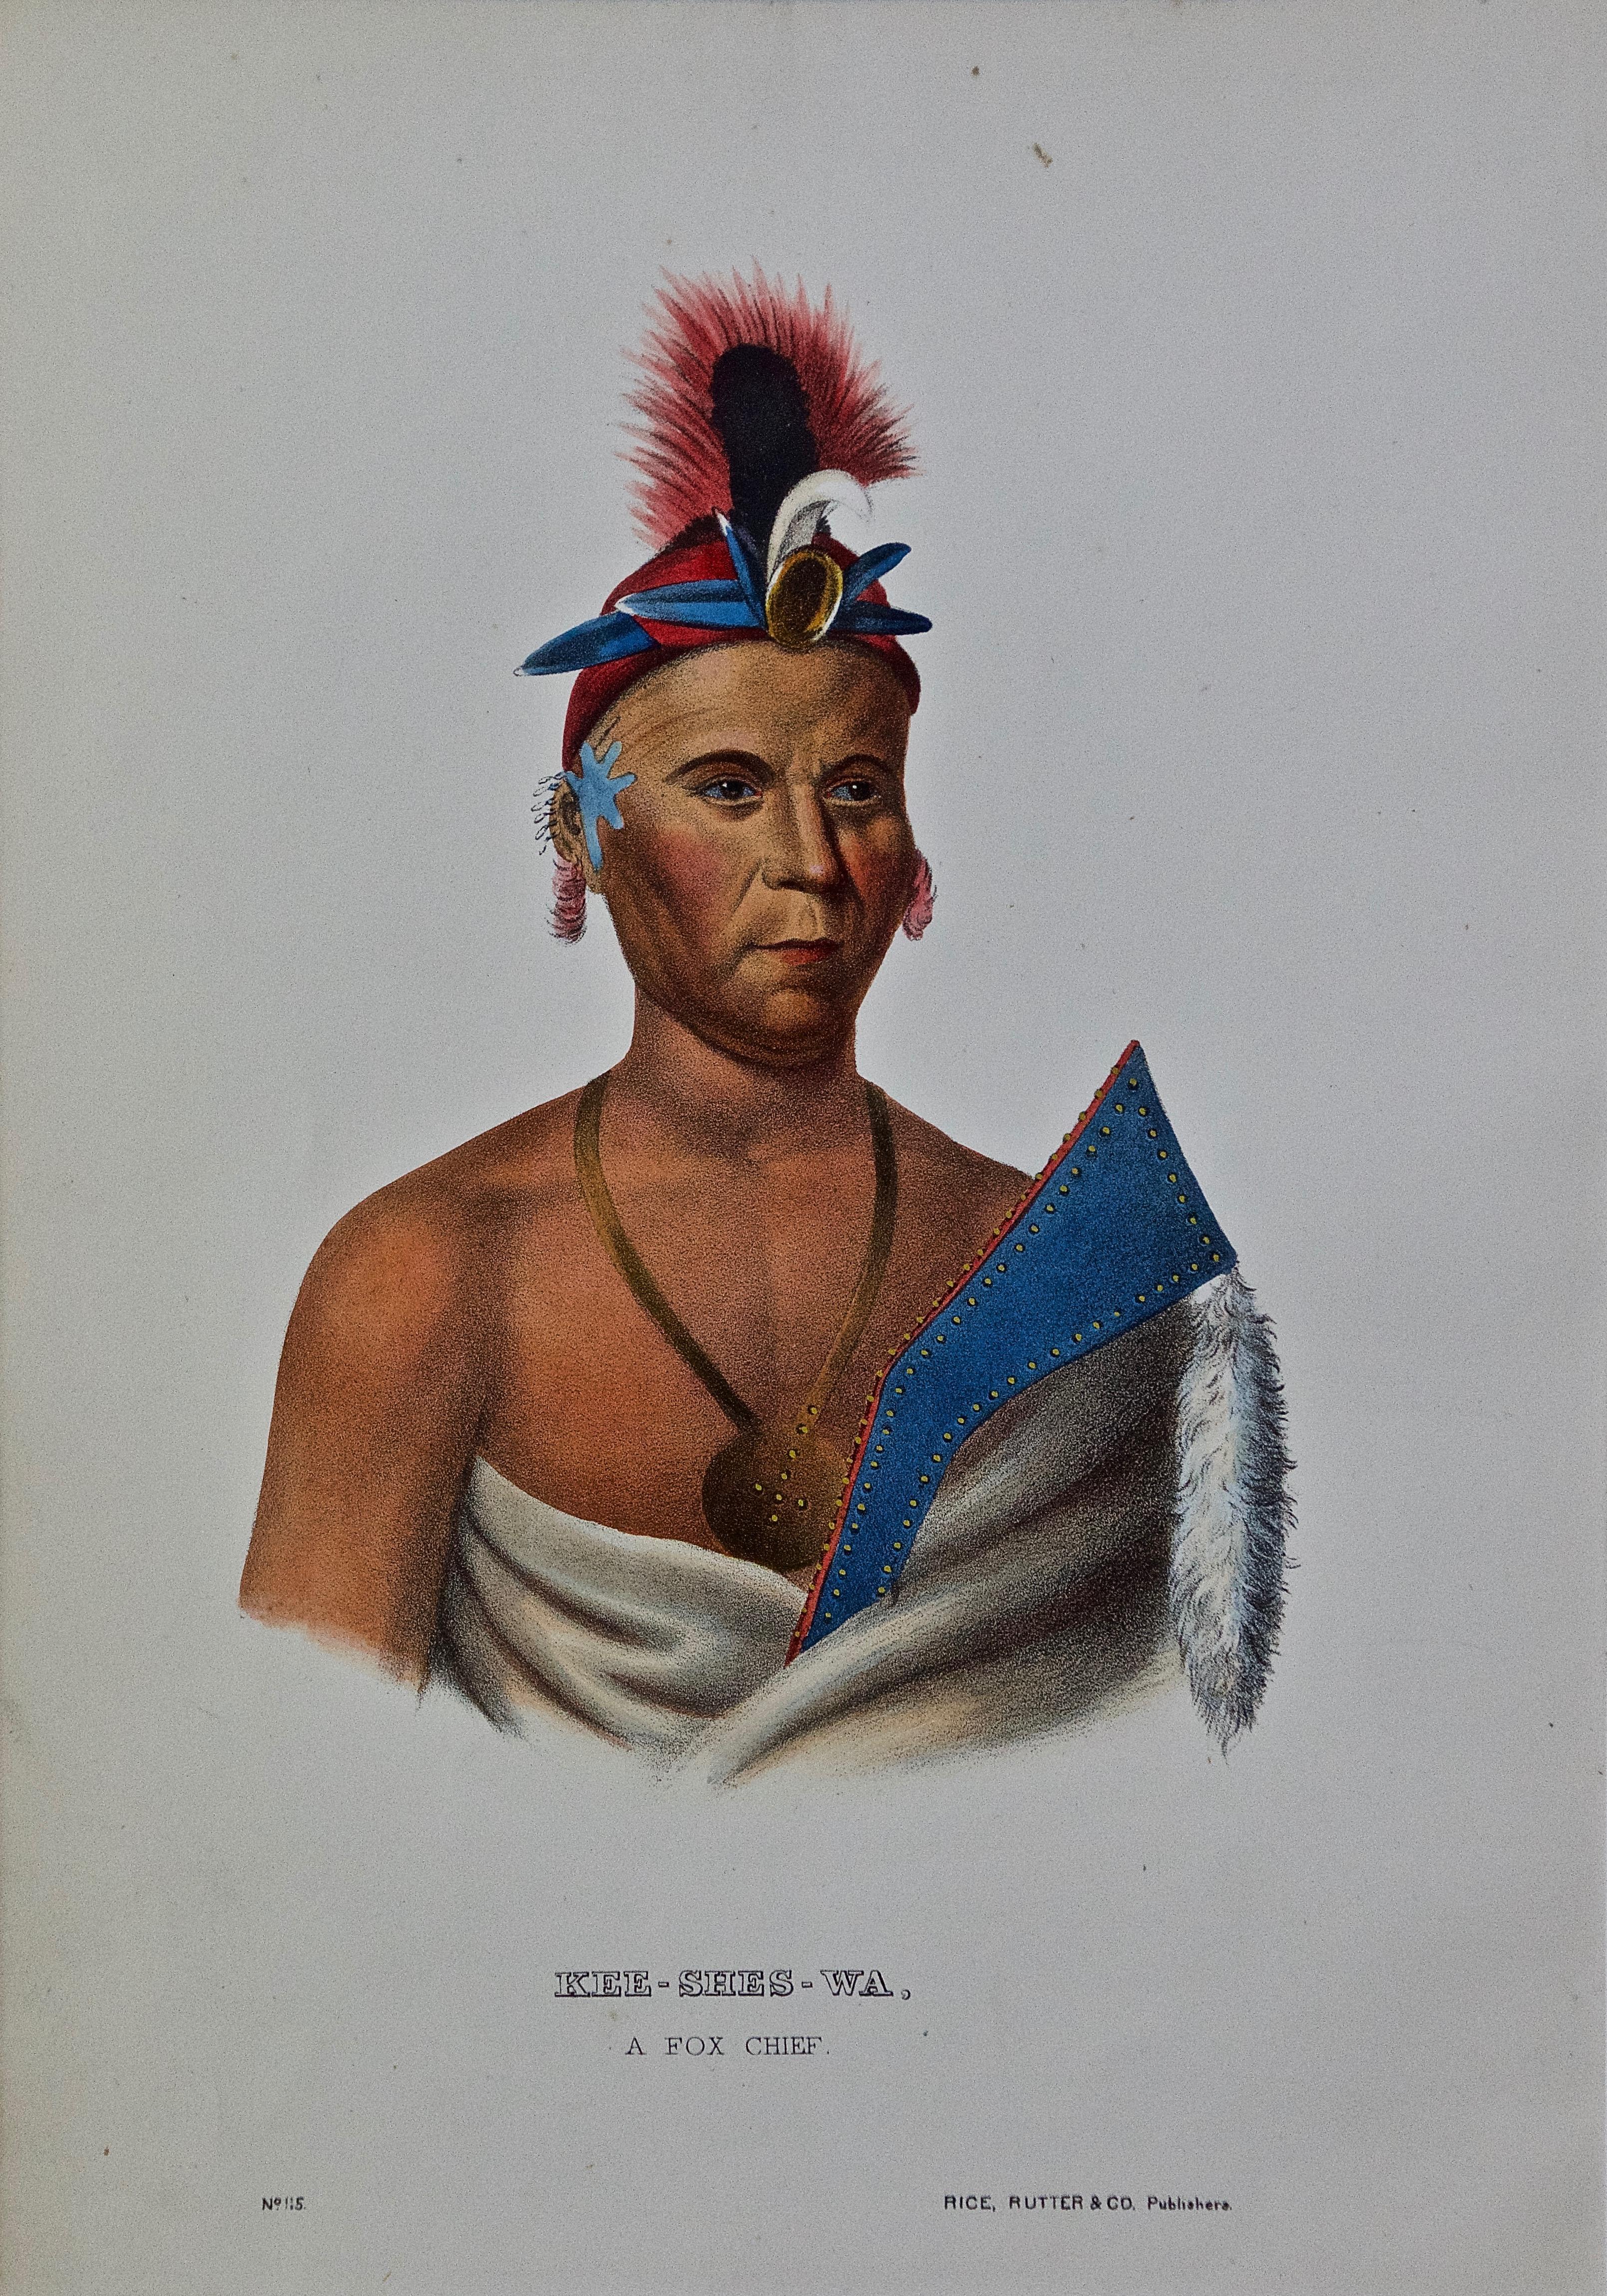 An original 19th century hand colored McKenney and Hall engraving of a Native American entitled "Kee-Shes-Wa, A Fox Chief, No. 115", published by Rice, Rutter & Co. in 1865.

This original McKenney and Hall engraving is presented in a cream colored